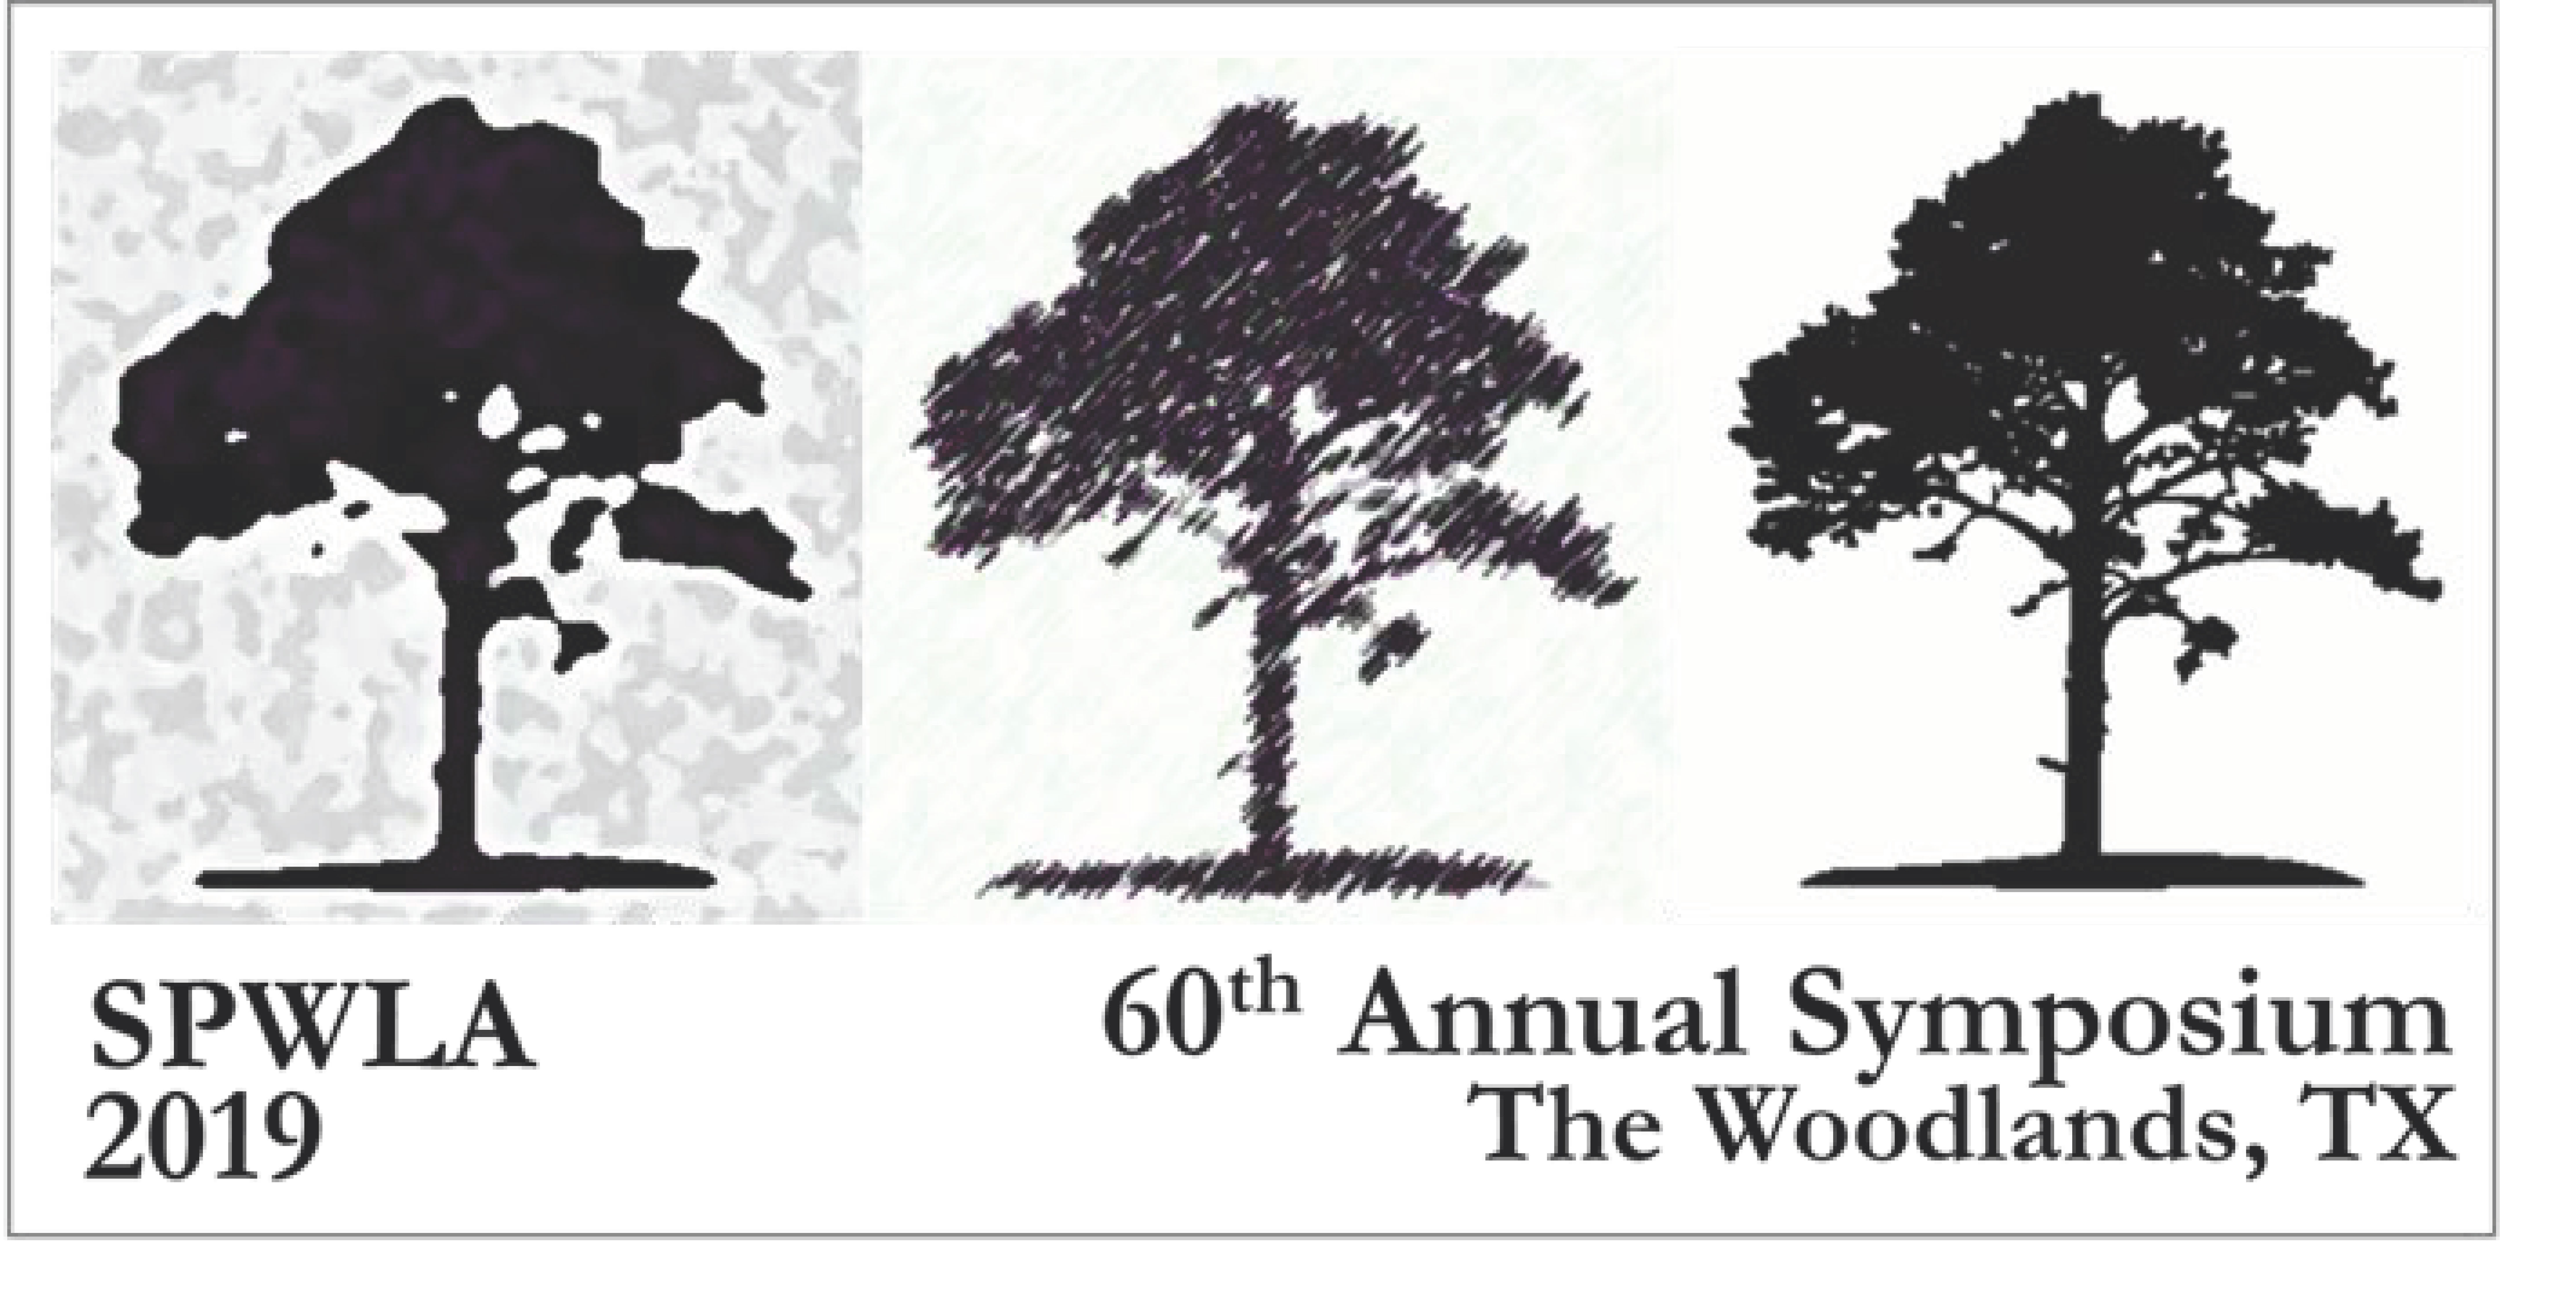 2019 SYMPOSIUM WEBINAR - Live From The Woodlands